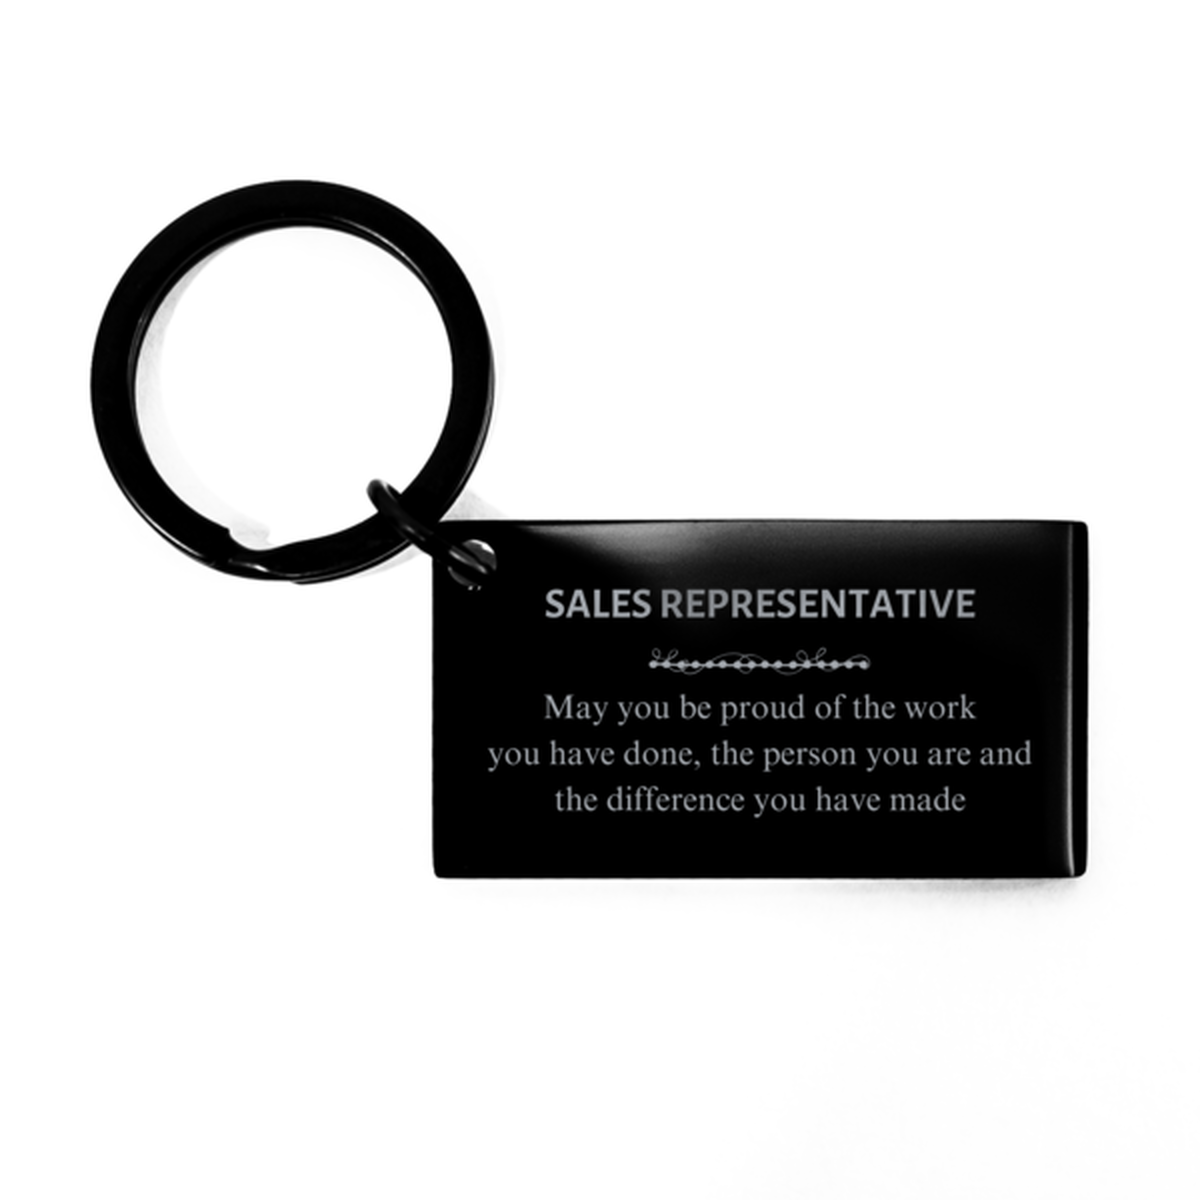 Trainer May you be proud of the work you have done, Retirement Sales Representative Keychain for Colleague Appreciation Gifts Amazing for Sales Representative